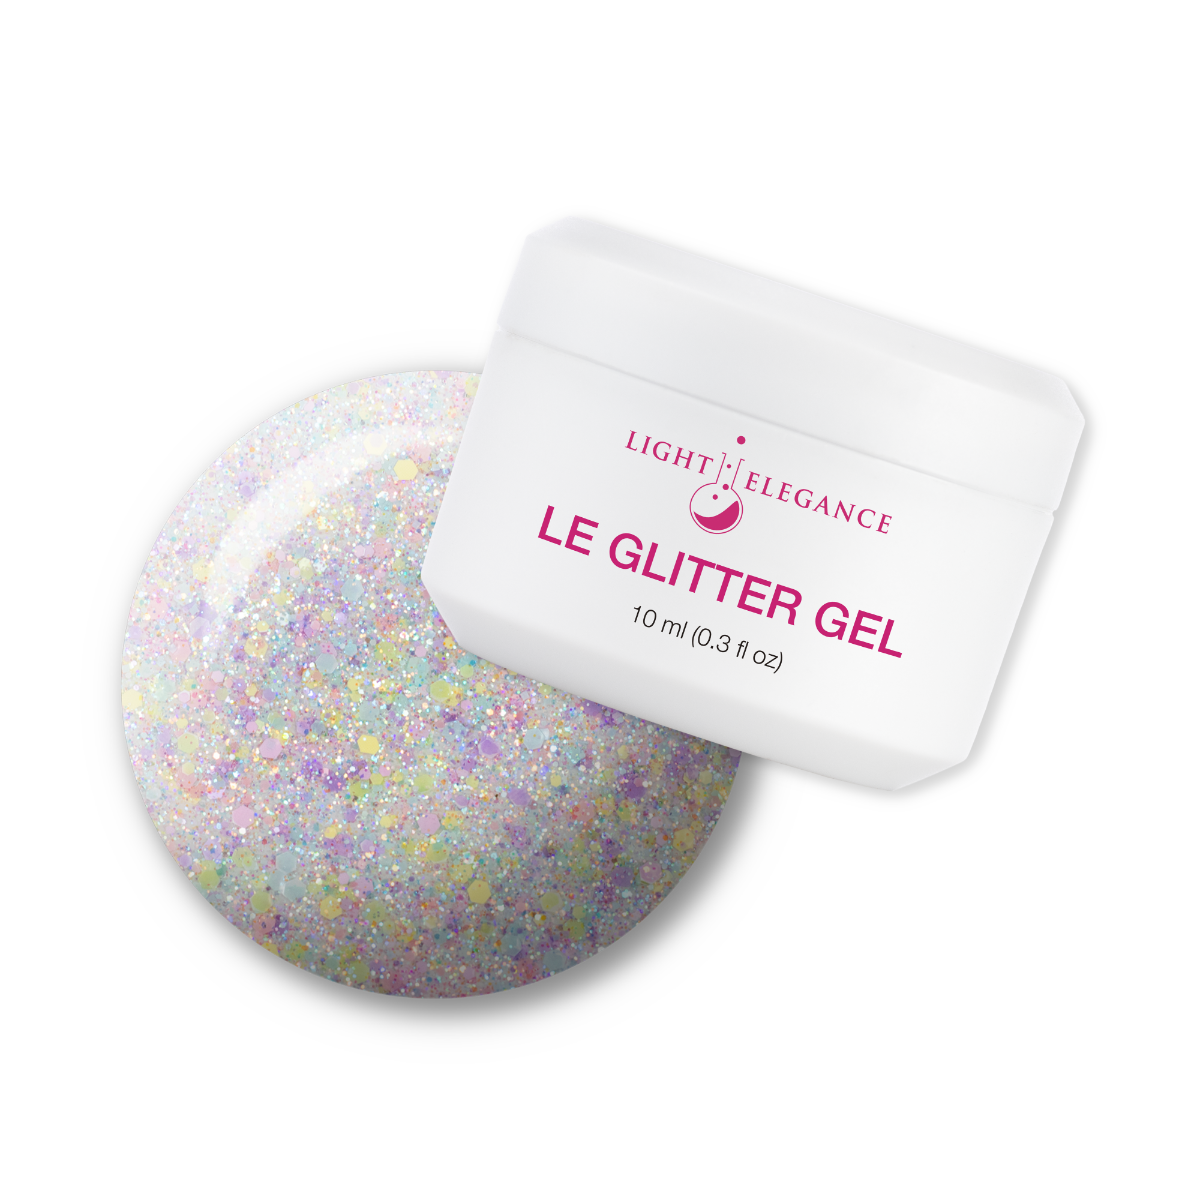 Light Elegance Glitter Gel - Don't Frame Me In :: New Packaging - Creata Beauty - Professional Beauty Products